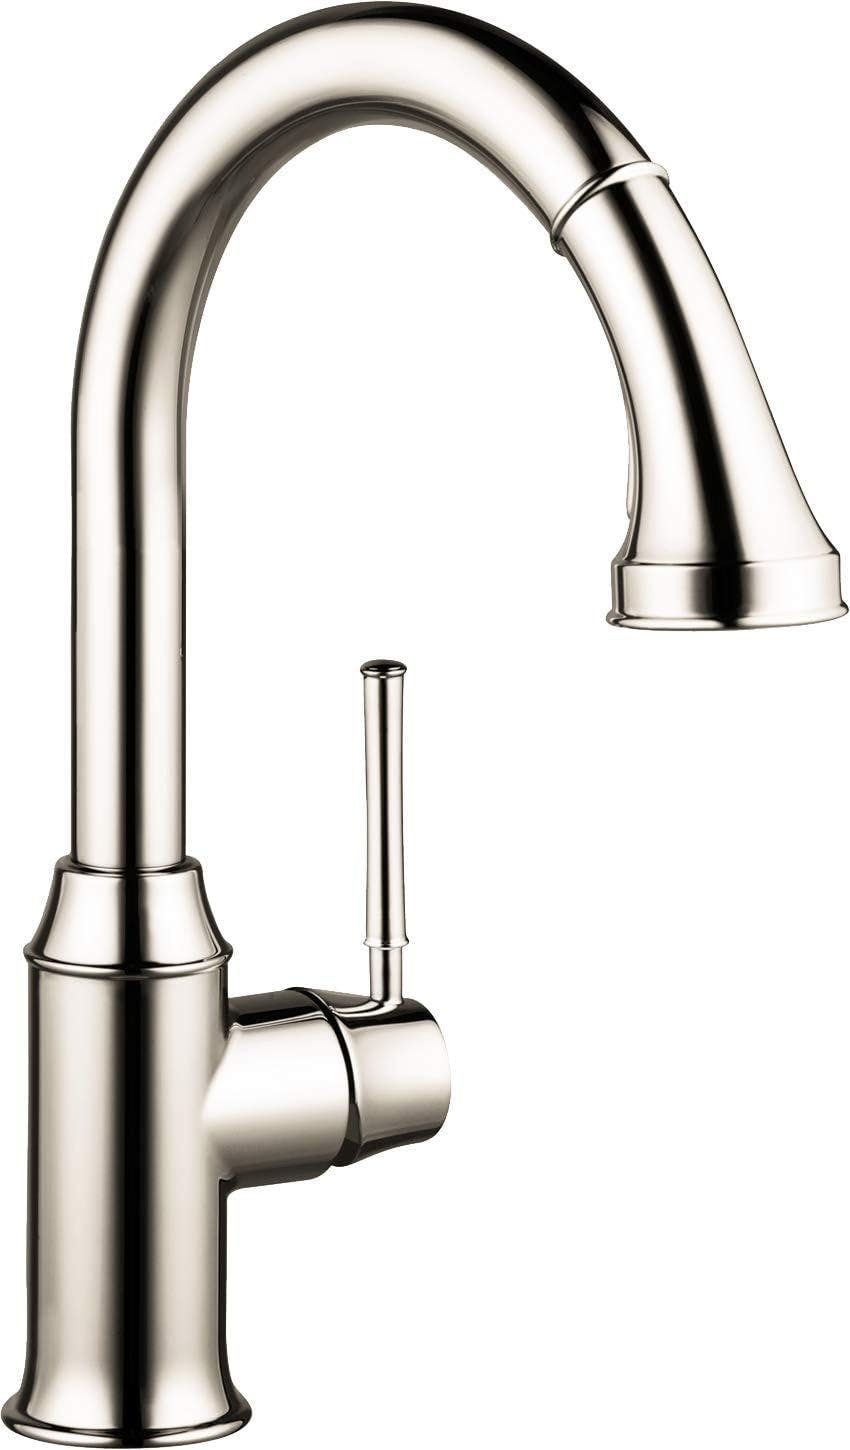 Talis C 15" High Arc Nickel Finish Kitchen Faucet with Pull-Out Spray